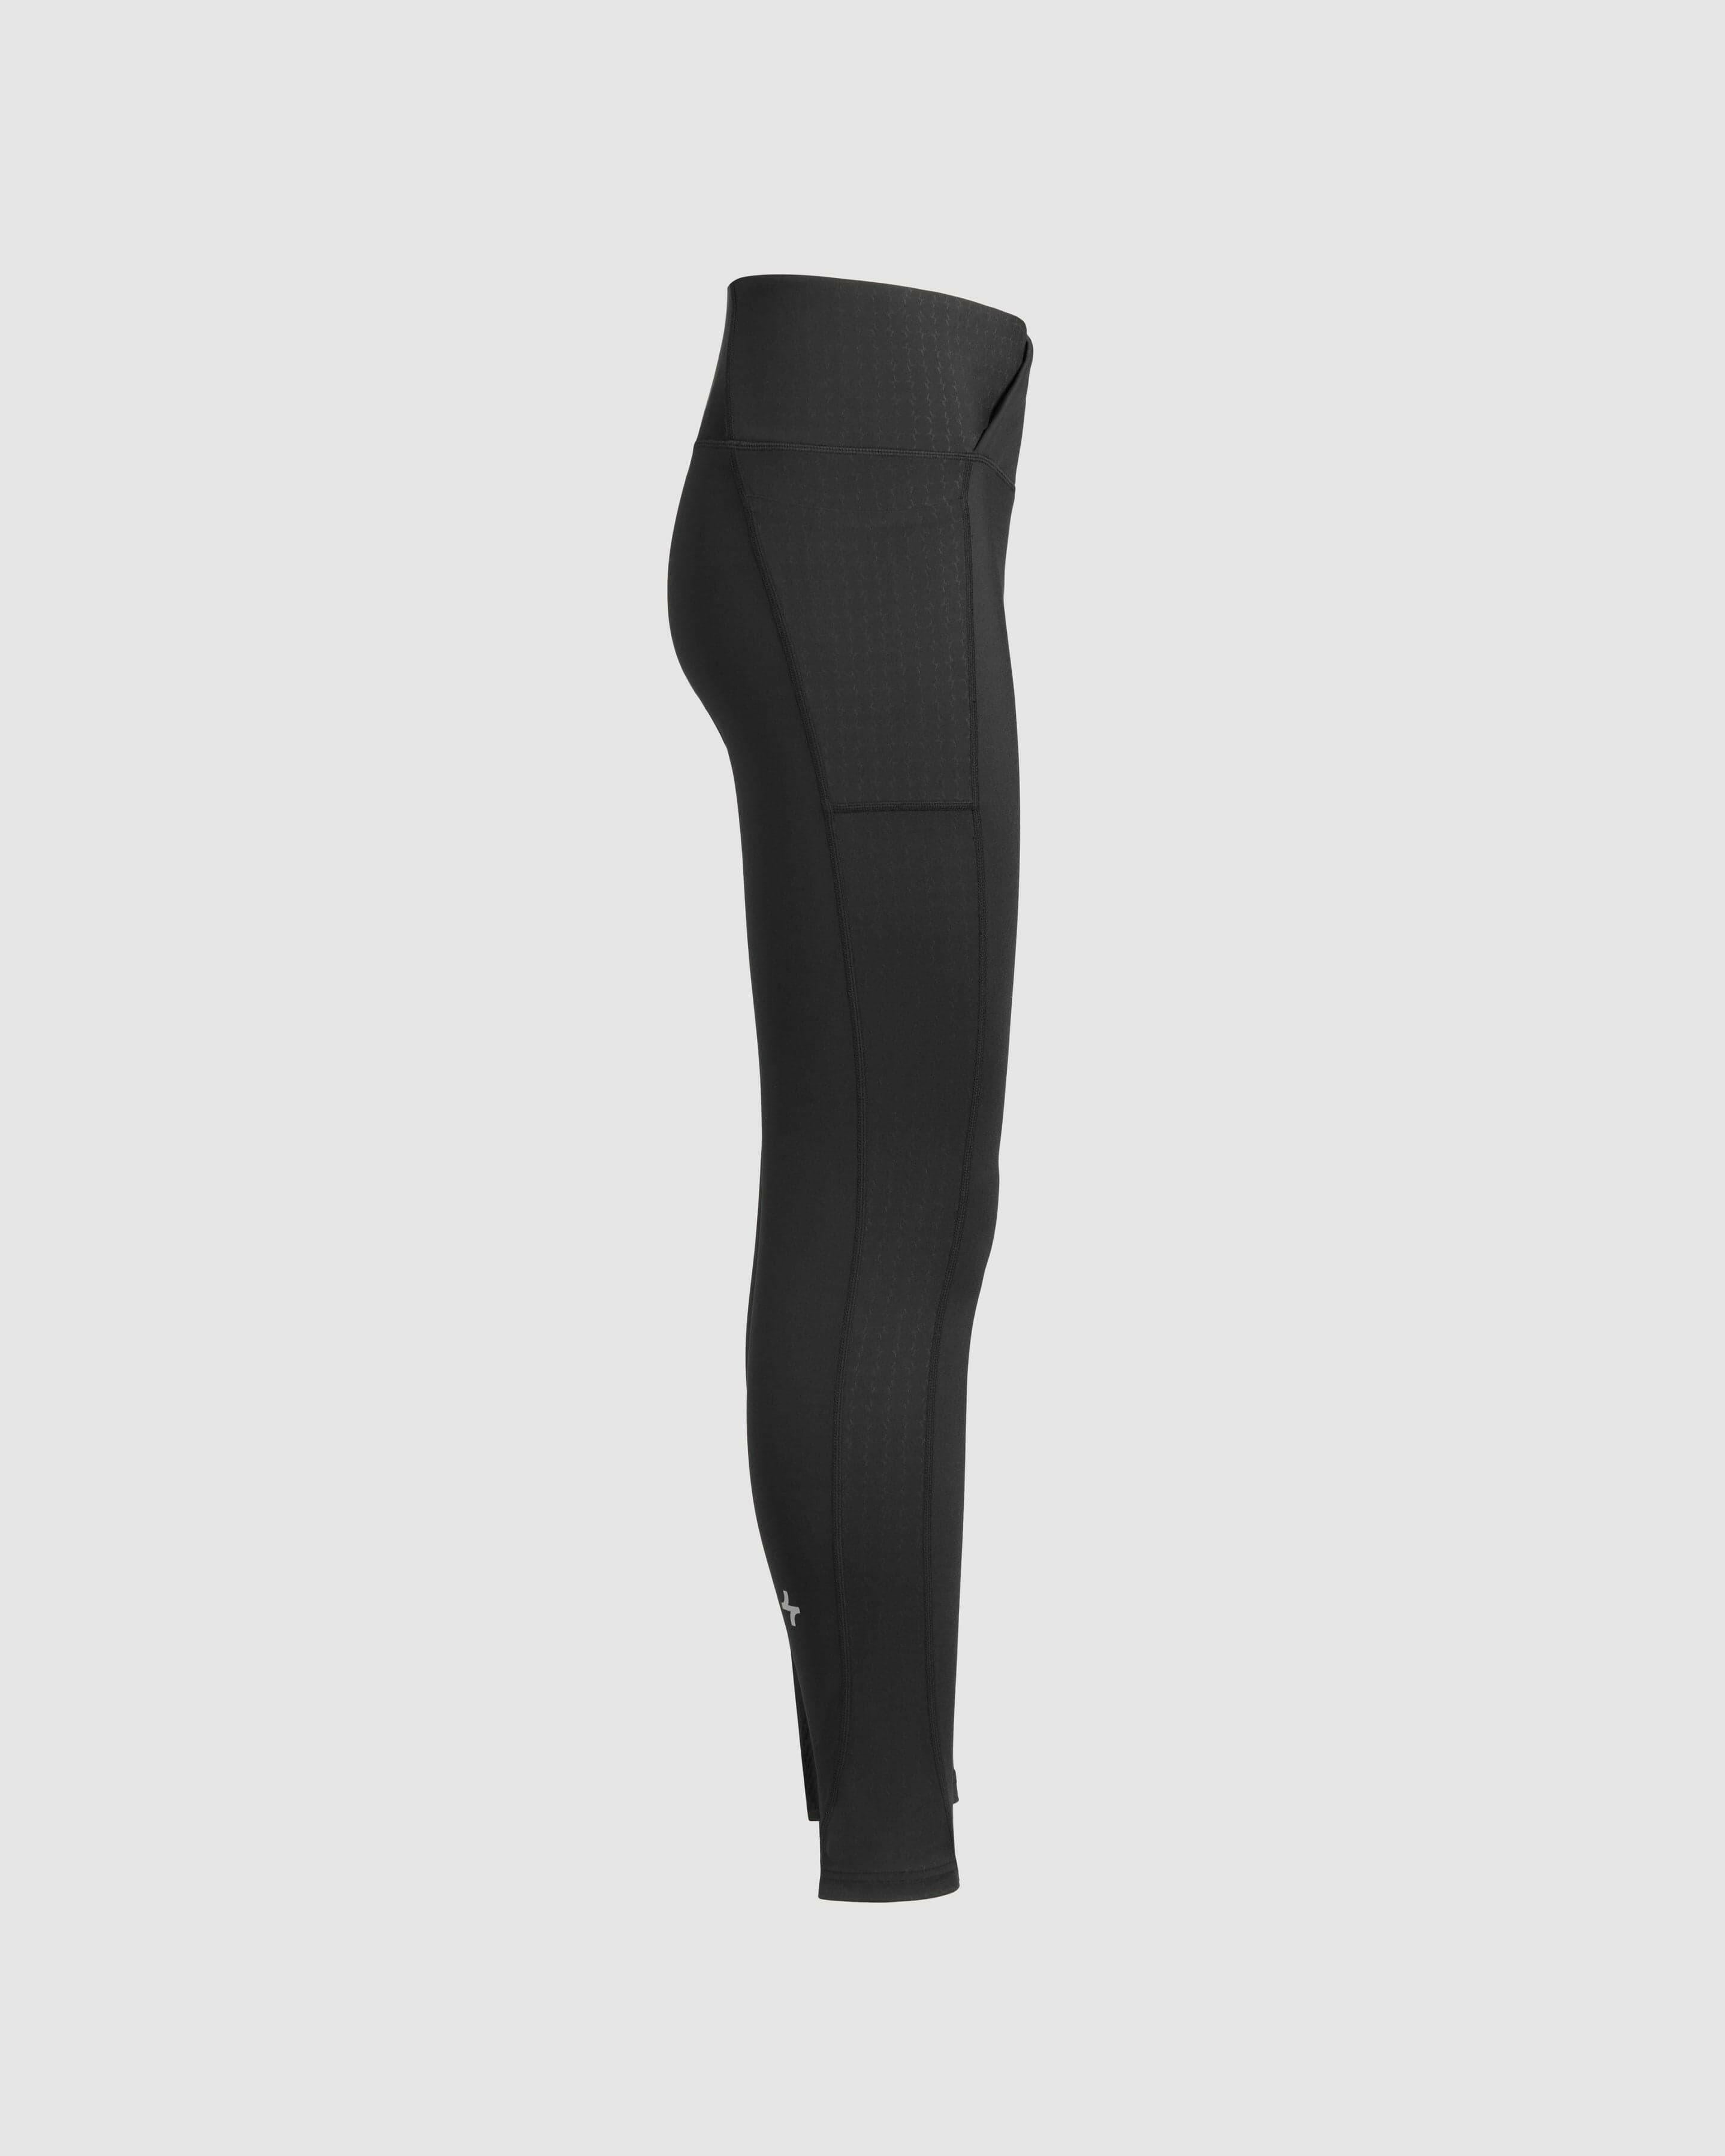 Side view of Stylish black LADINA LEGGINGS by Qynda with a high waistband and better-fitting, zipper detail on white background.